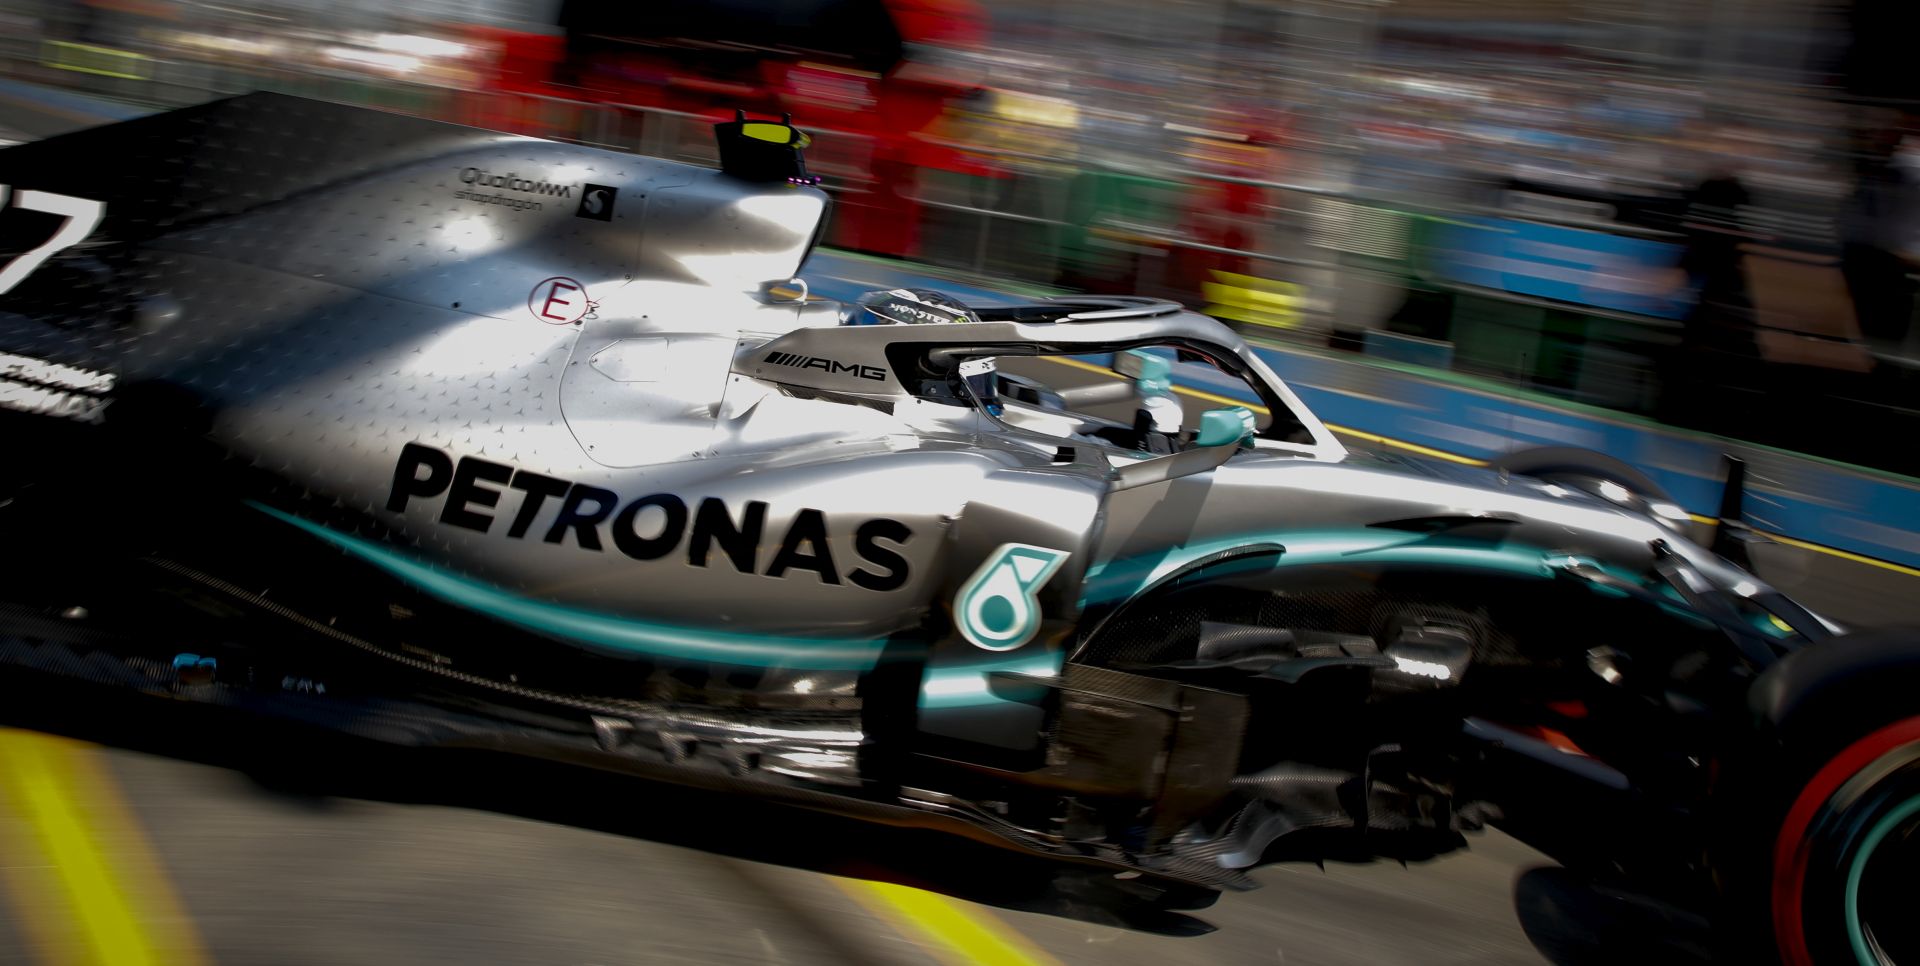 epa07441255 Finnish Formula One driver Valtteri Bottas of Mercedes AMG GP in action during the third practice session ahead of the 2019 Formula One Grand Prix of Australia at the Albert Park Grand Prix Circuit in Melbourne, Australia, 16 March 2019. The 2019 Formula One Grand Prix of Australia will take place on 17 March 2019.  EPA/DIEGO AZUBEL